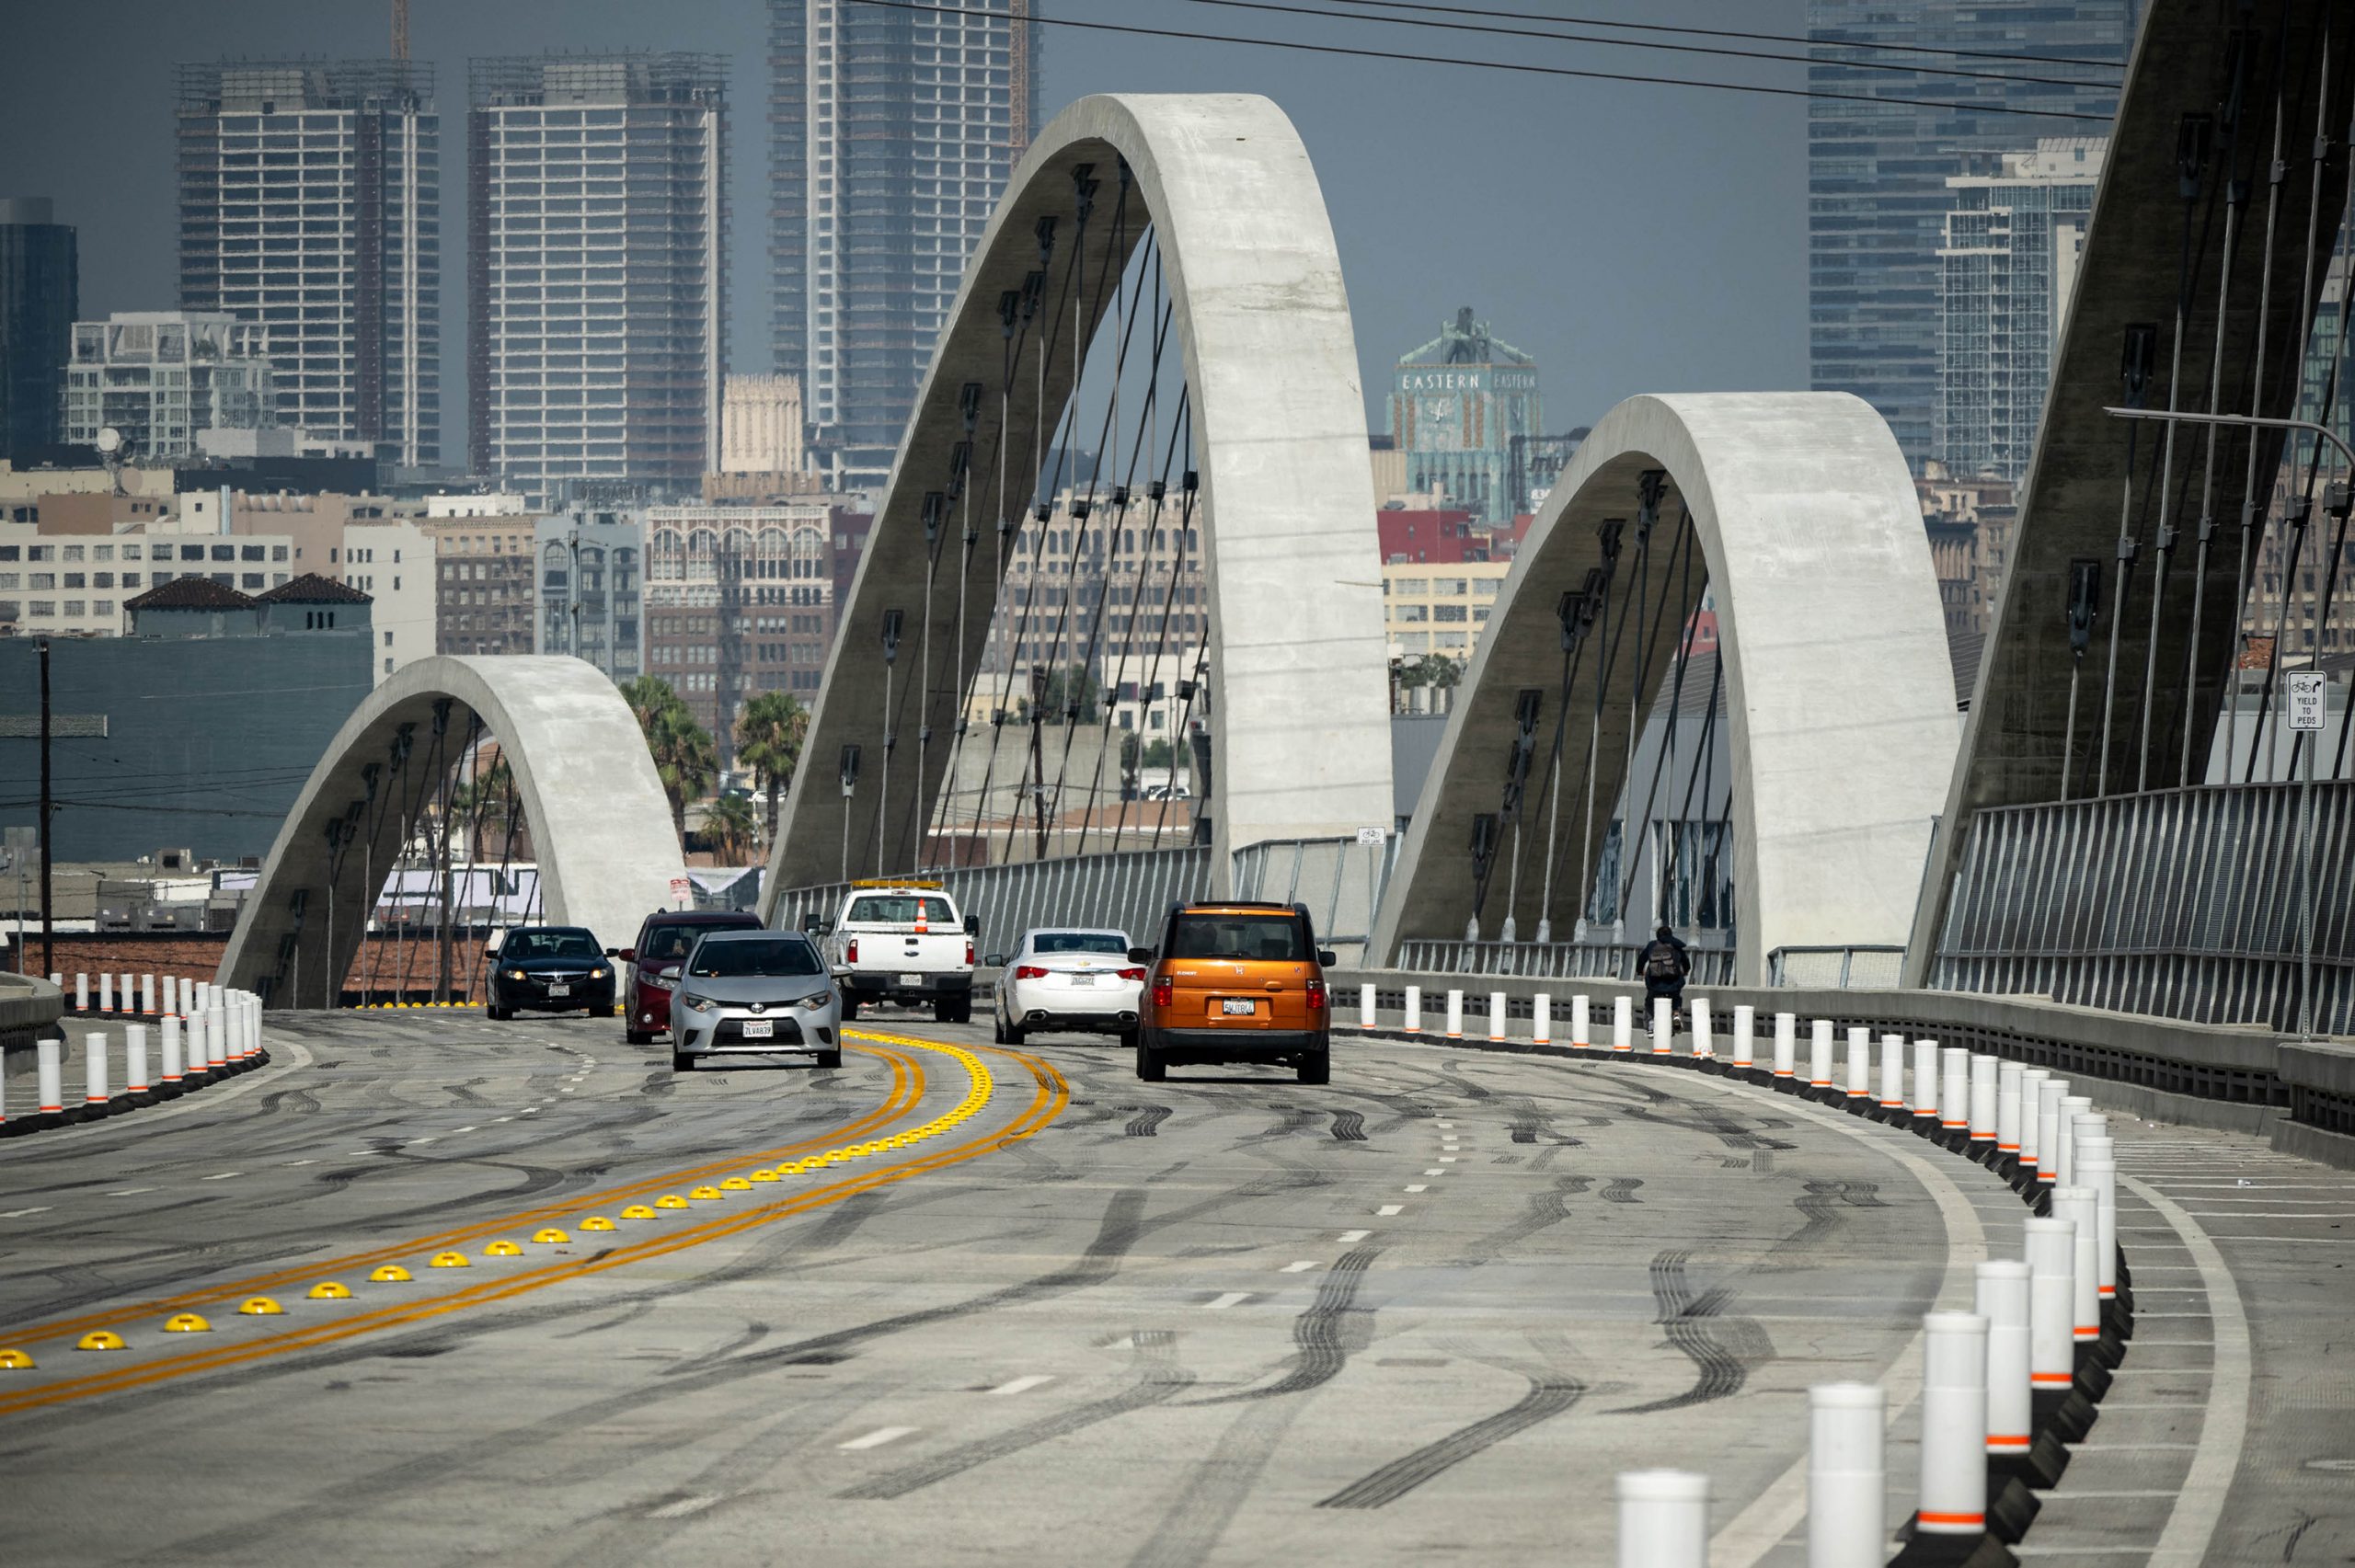 Los Angeles, CA - July 27:Skid marks cover many portions to the new 6th street bridge in Los Angele...